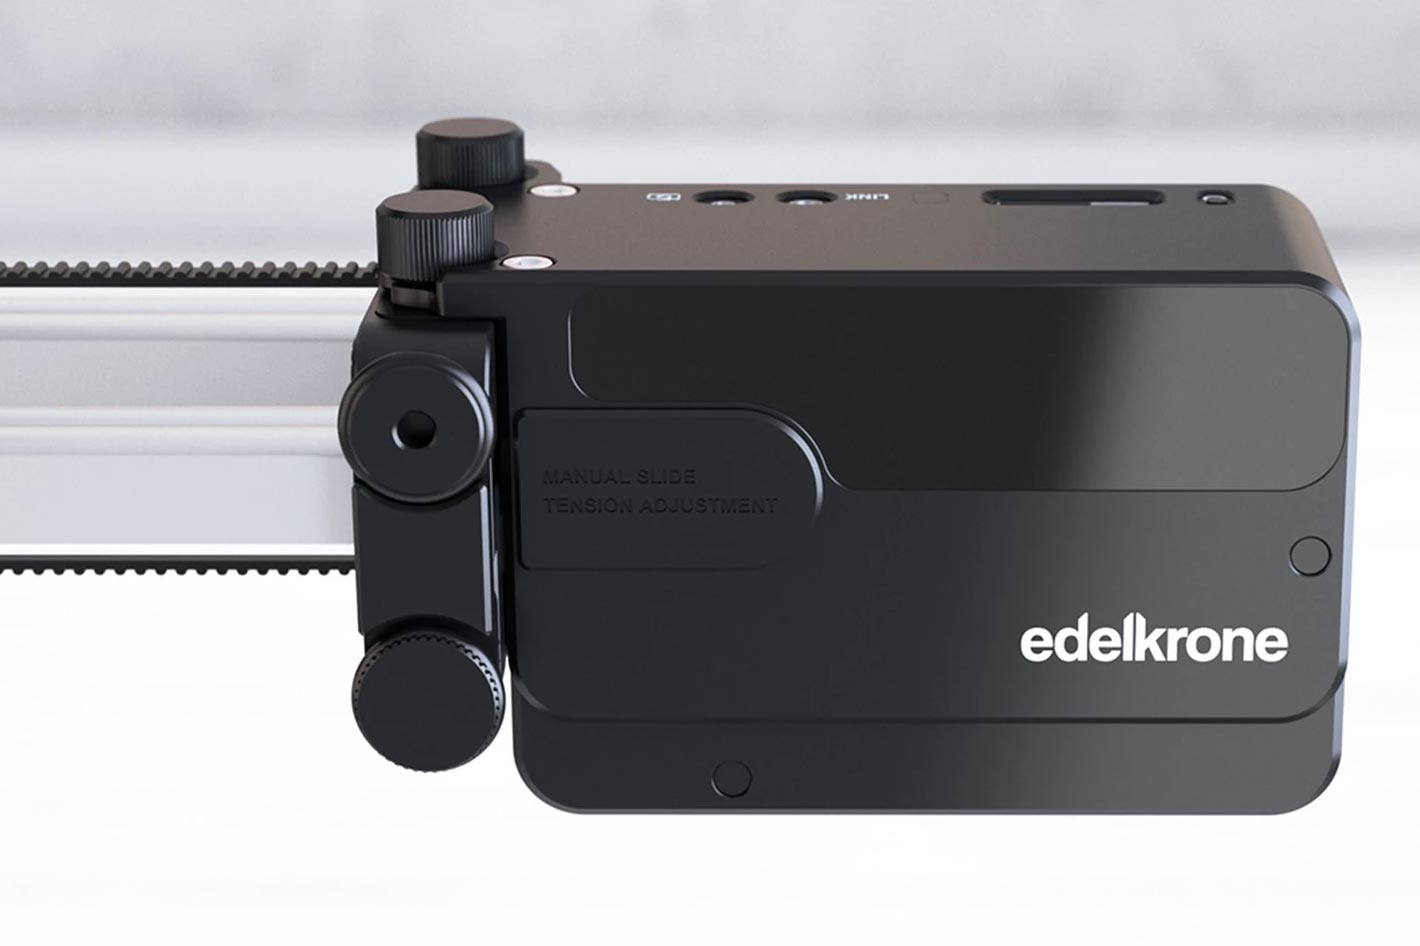 SliderPLUS v5: the new portable slider with long camera travel by